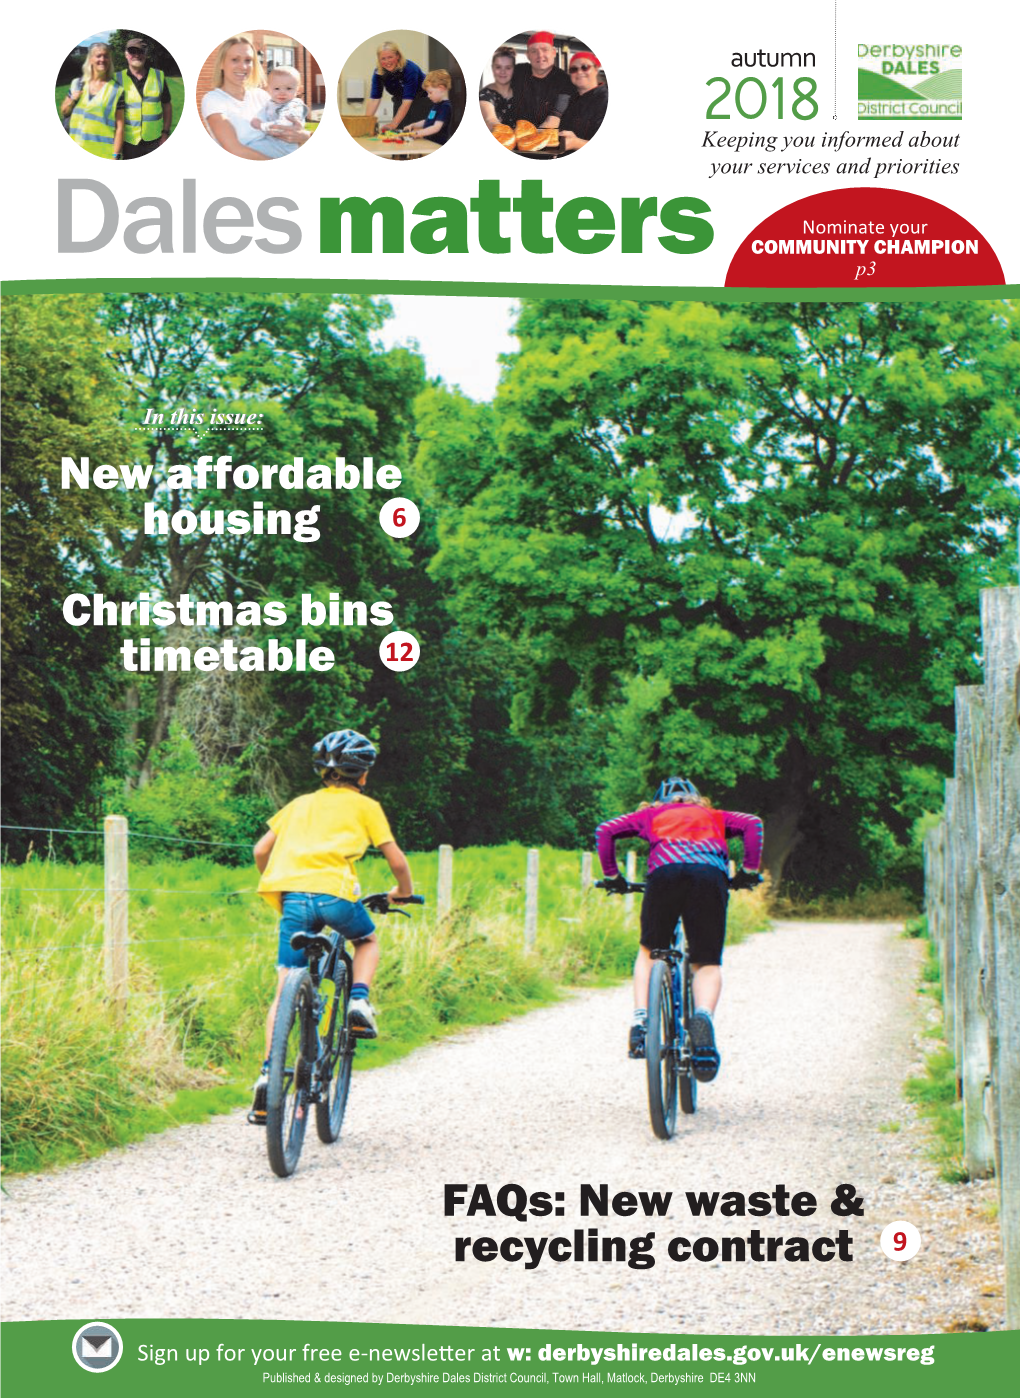 Dales Matters, Derbyshire Dales District Council, Chief Executive Paul Wilson - Read About Paul's Appoint- Town Hall, Matlock DE4 3NN